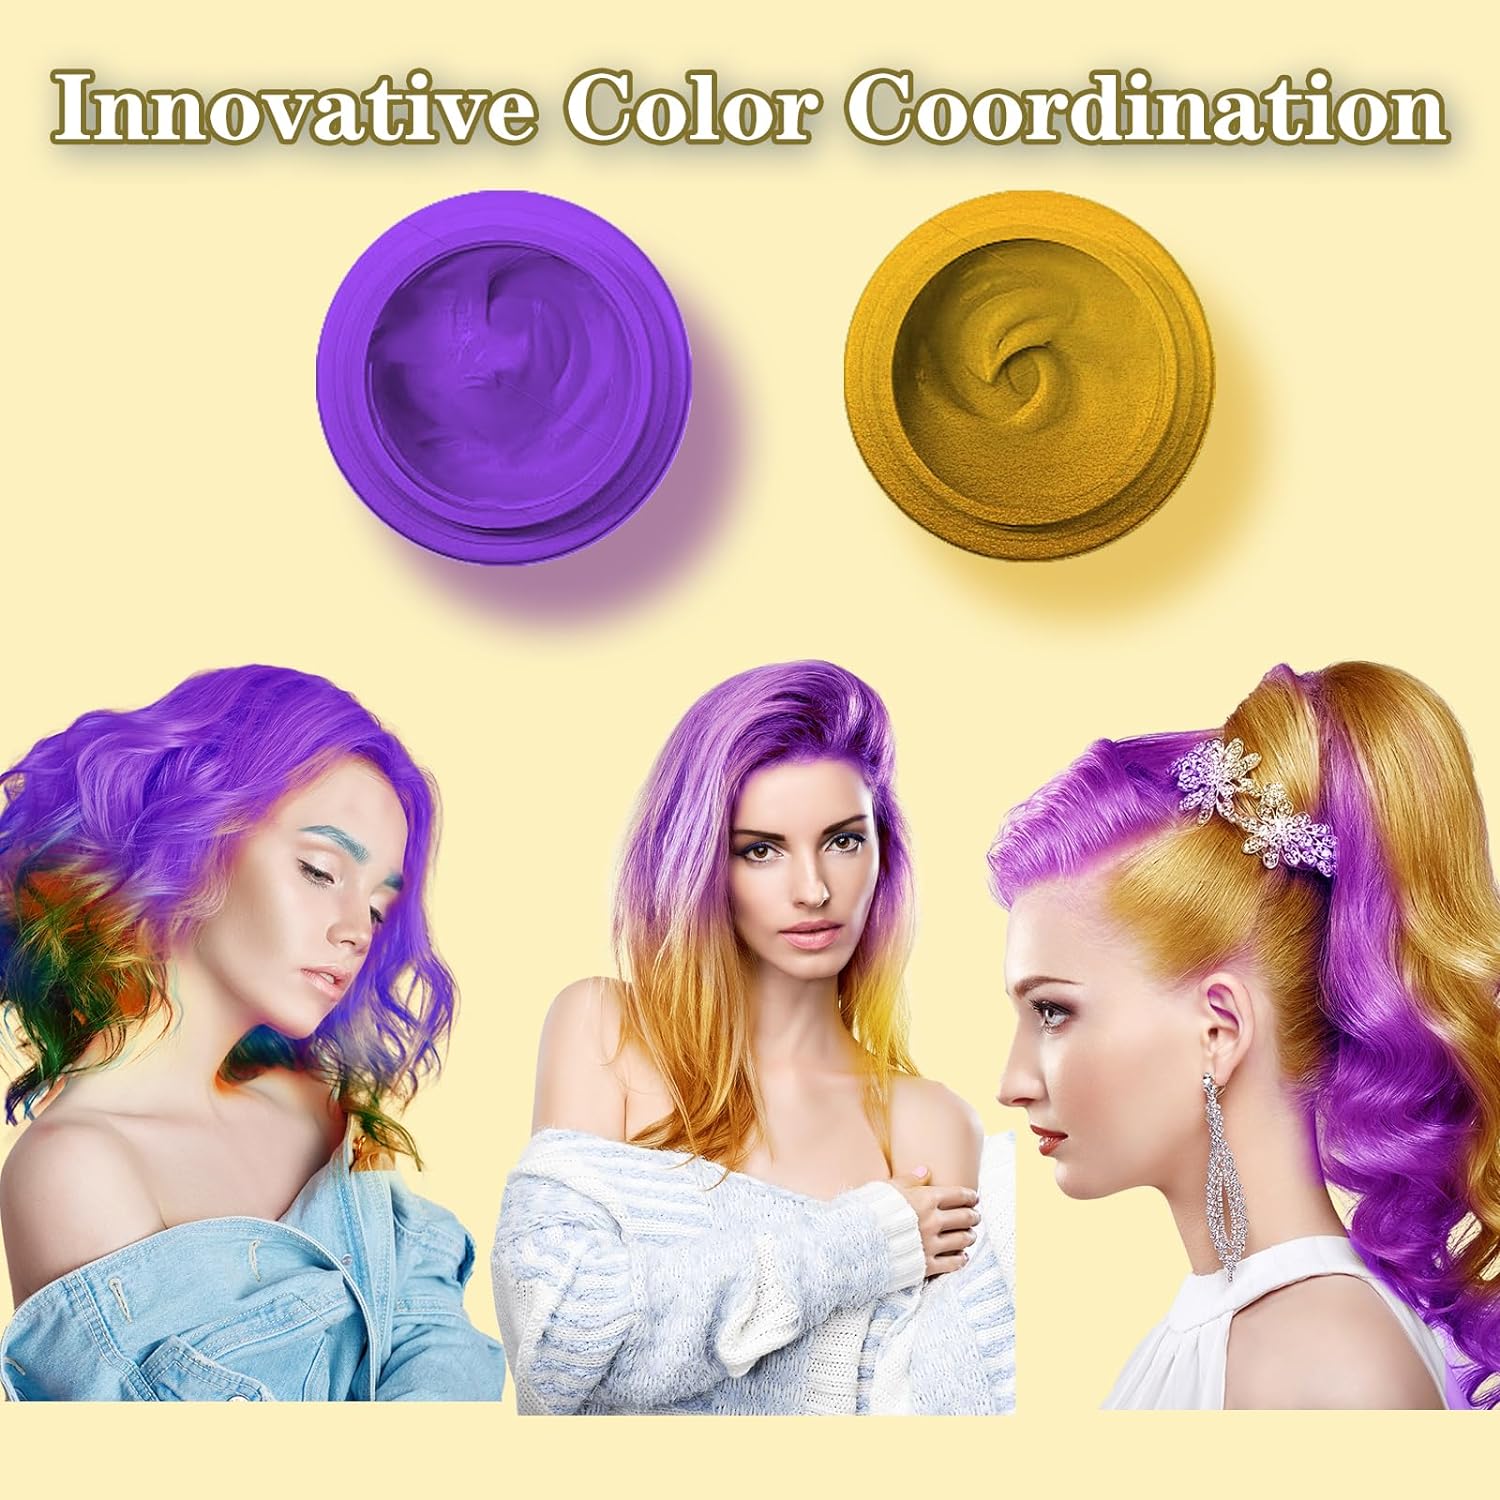 HaiolorPro Hair Color Wax Temporary Washable, Temporary Hair Color Dye for Men Wowen Kids, Hair Makeup Paint Wax for Parties or Cosplay, Hair Coloring Products No Messy (White)